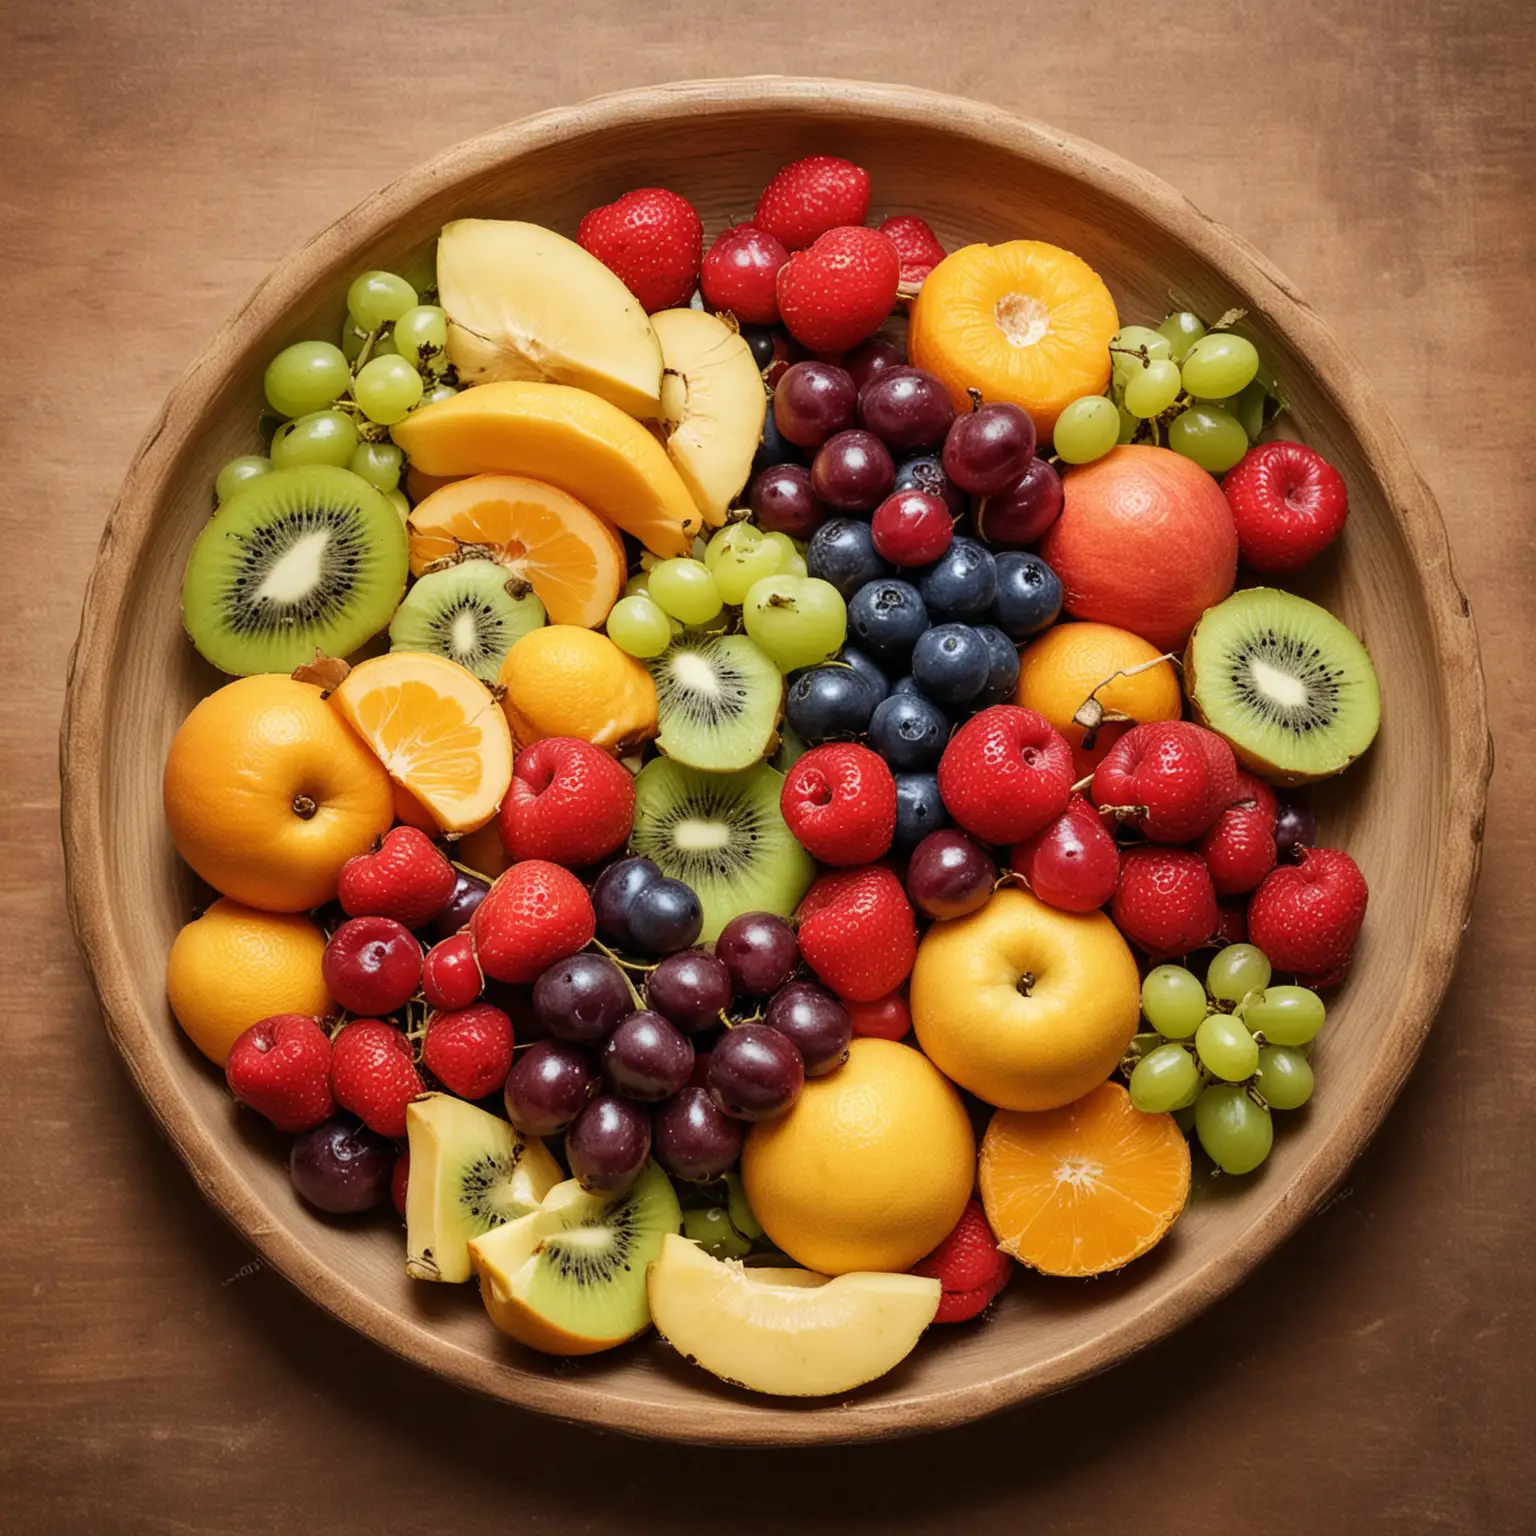 Colorful Fresh Fruits Arranged on a Plate